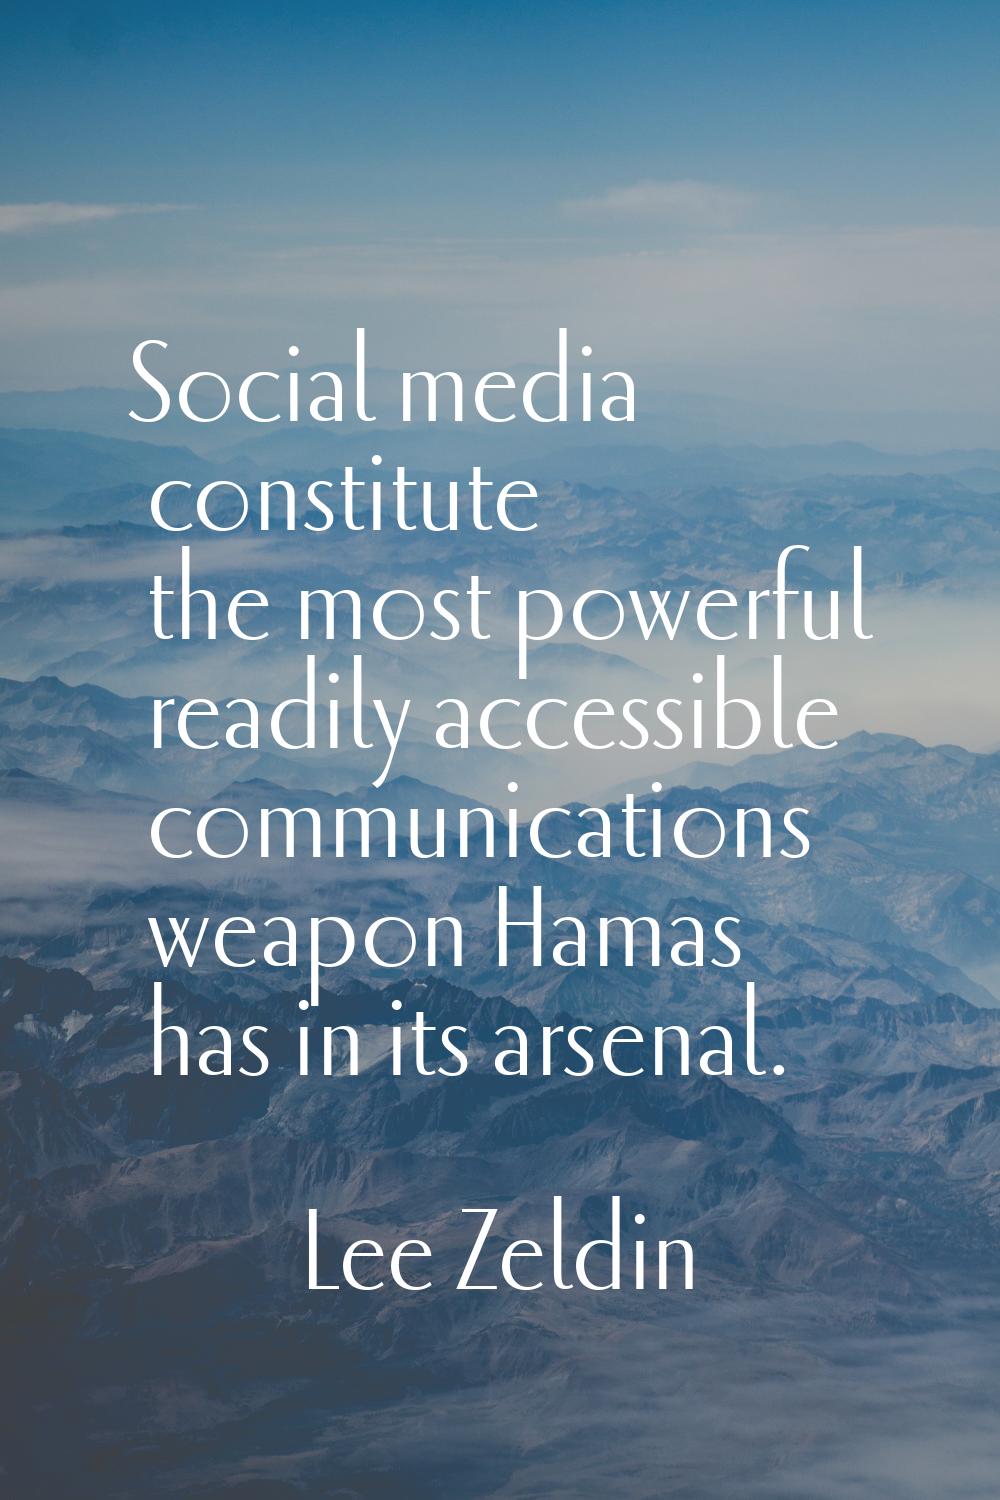 Social media constitute the most powerful readily accessible communications weapon Hamas has in its